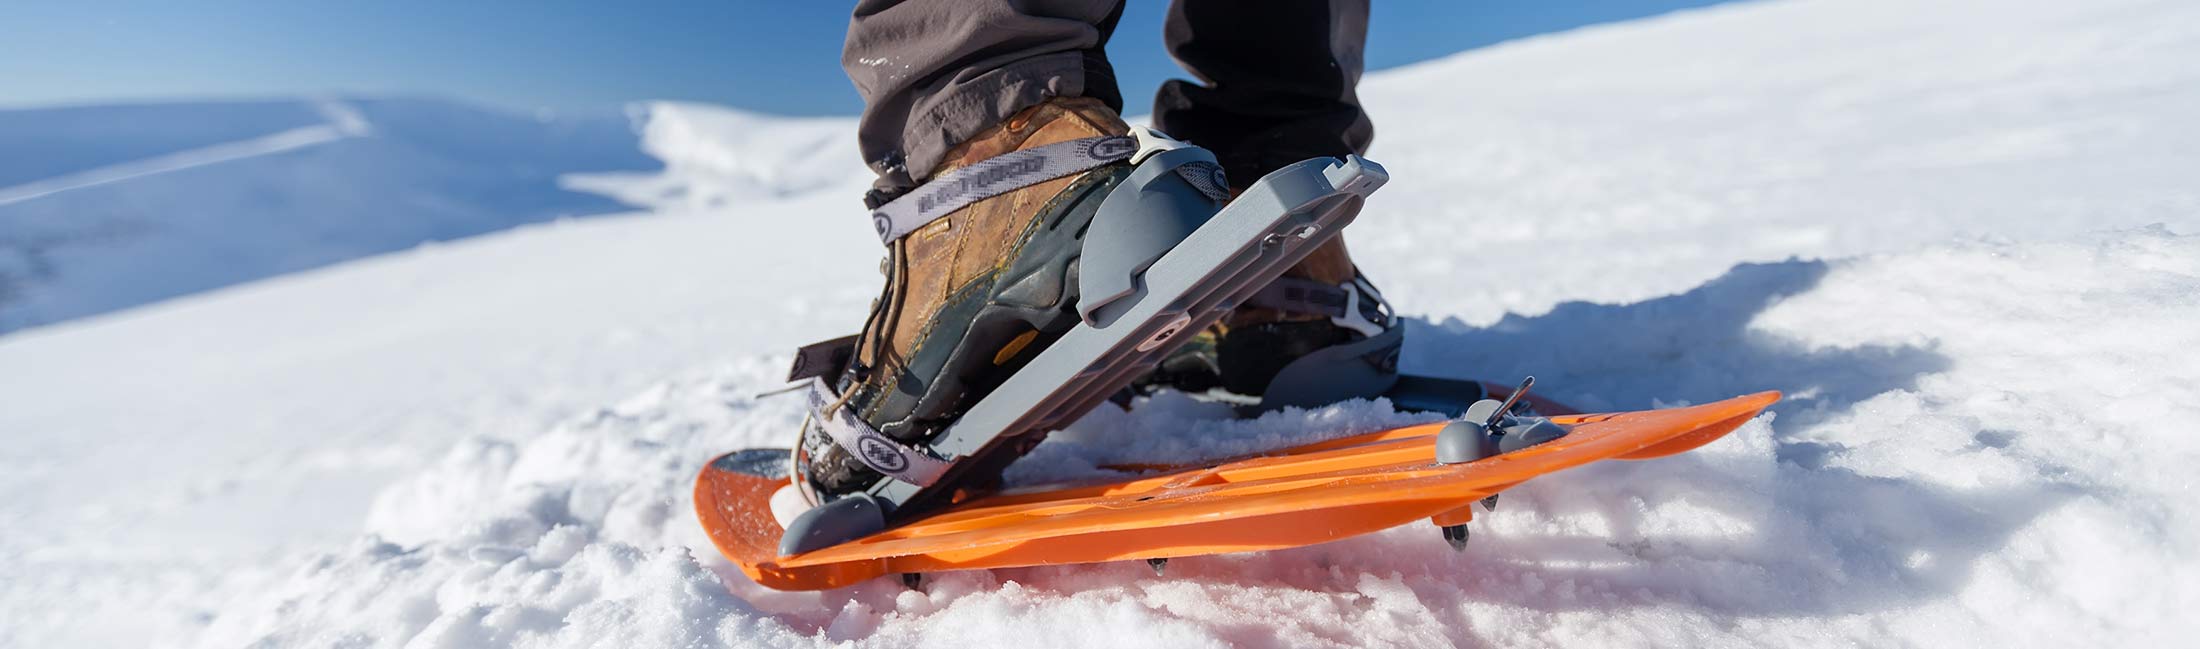 Take A Trek Through The Hills In Snowshoes